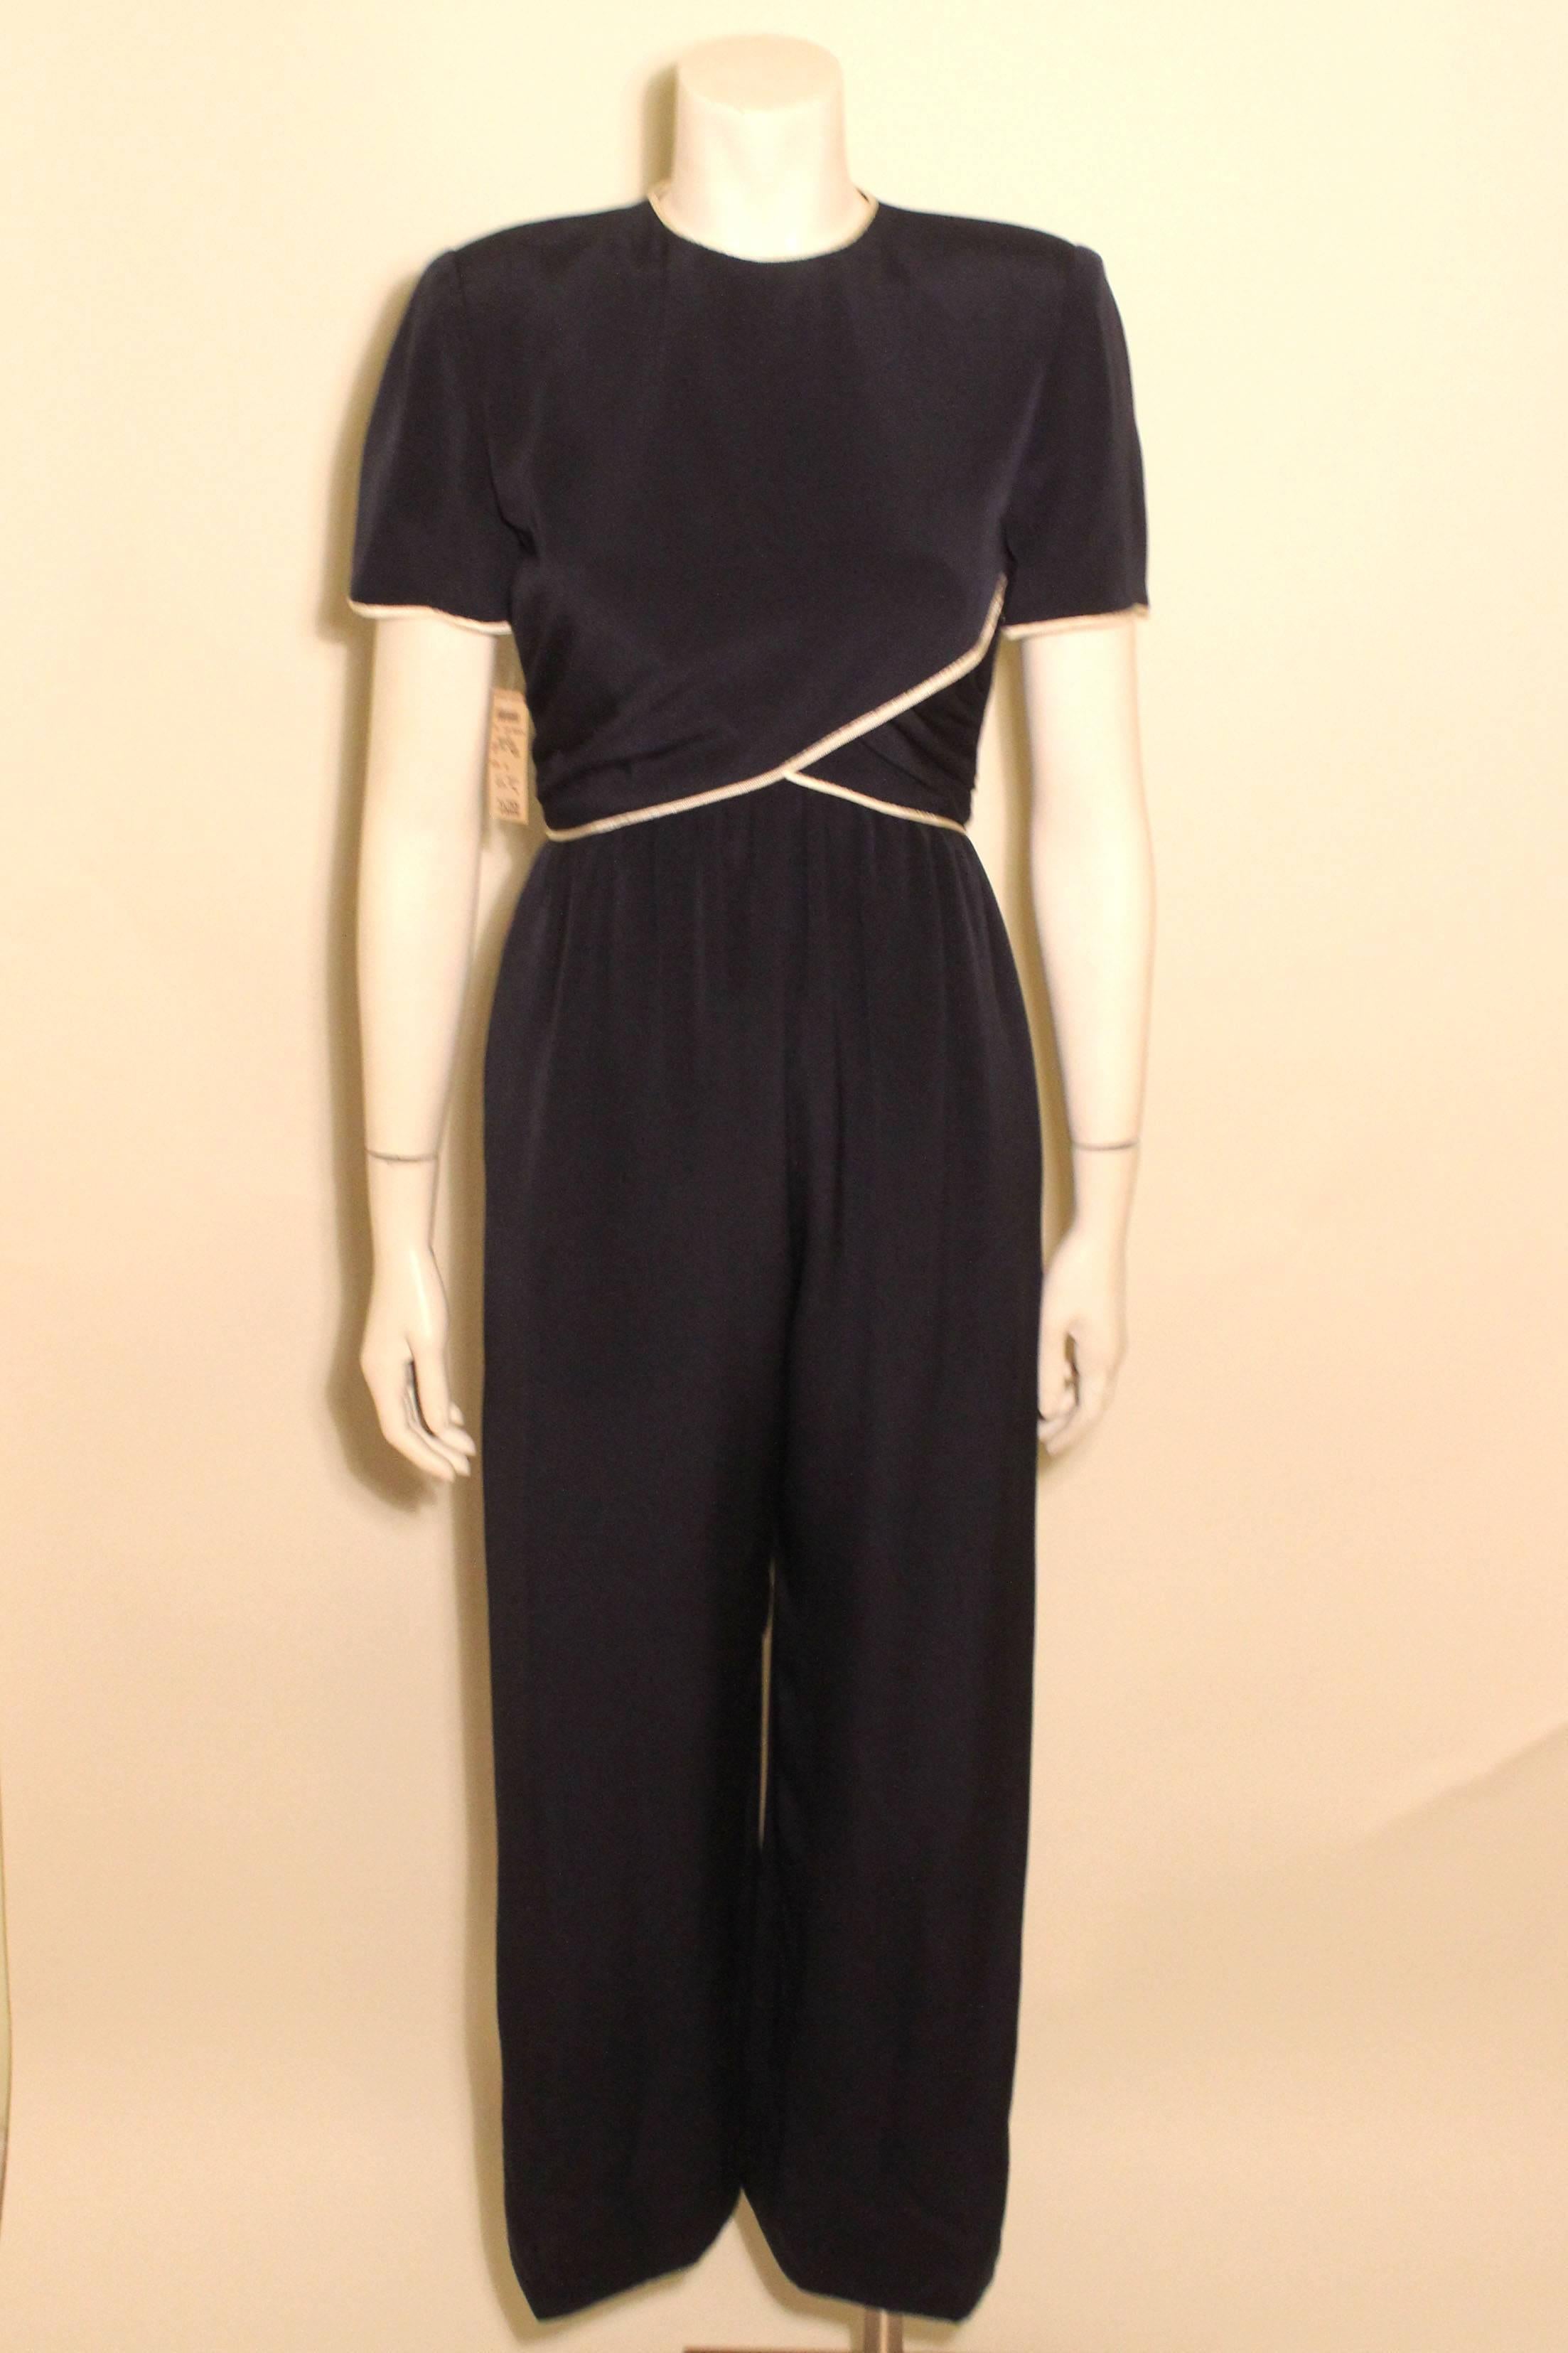 This Bill Blass jumpsuit is a chic navy silk with white piping detail. The top drapes nicely with side ruching. The fabric is slightly gathered at the waist, falling in graceful pleats to wide legs. The original Bergdorf Goodman tag is attached. 